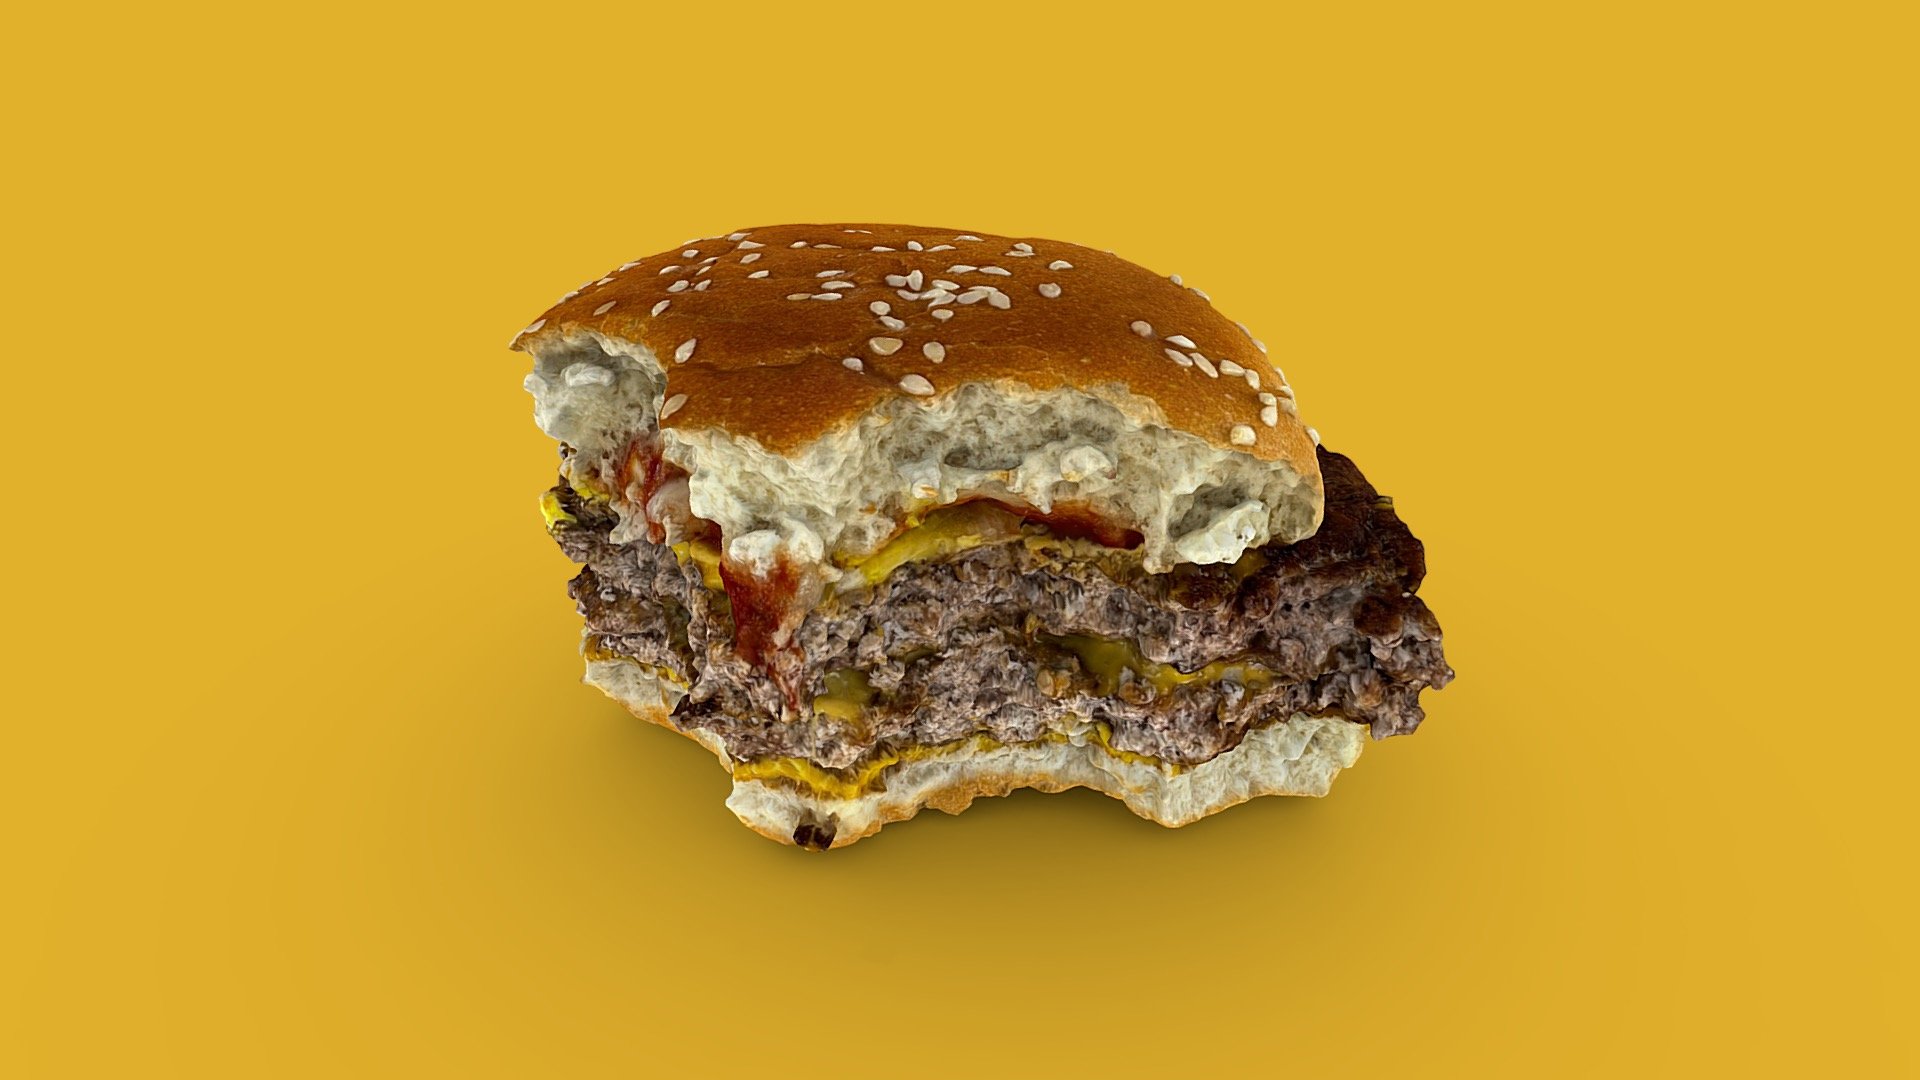 This burger from a famous McRestaurant was captured with Polycam in 250 photos 3d model